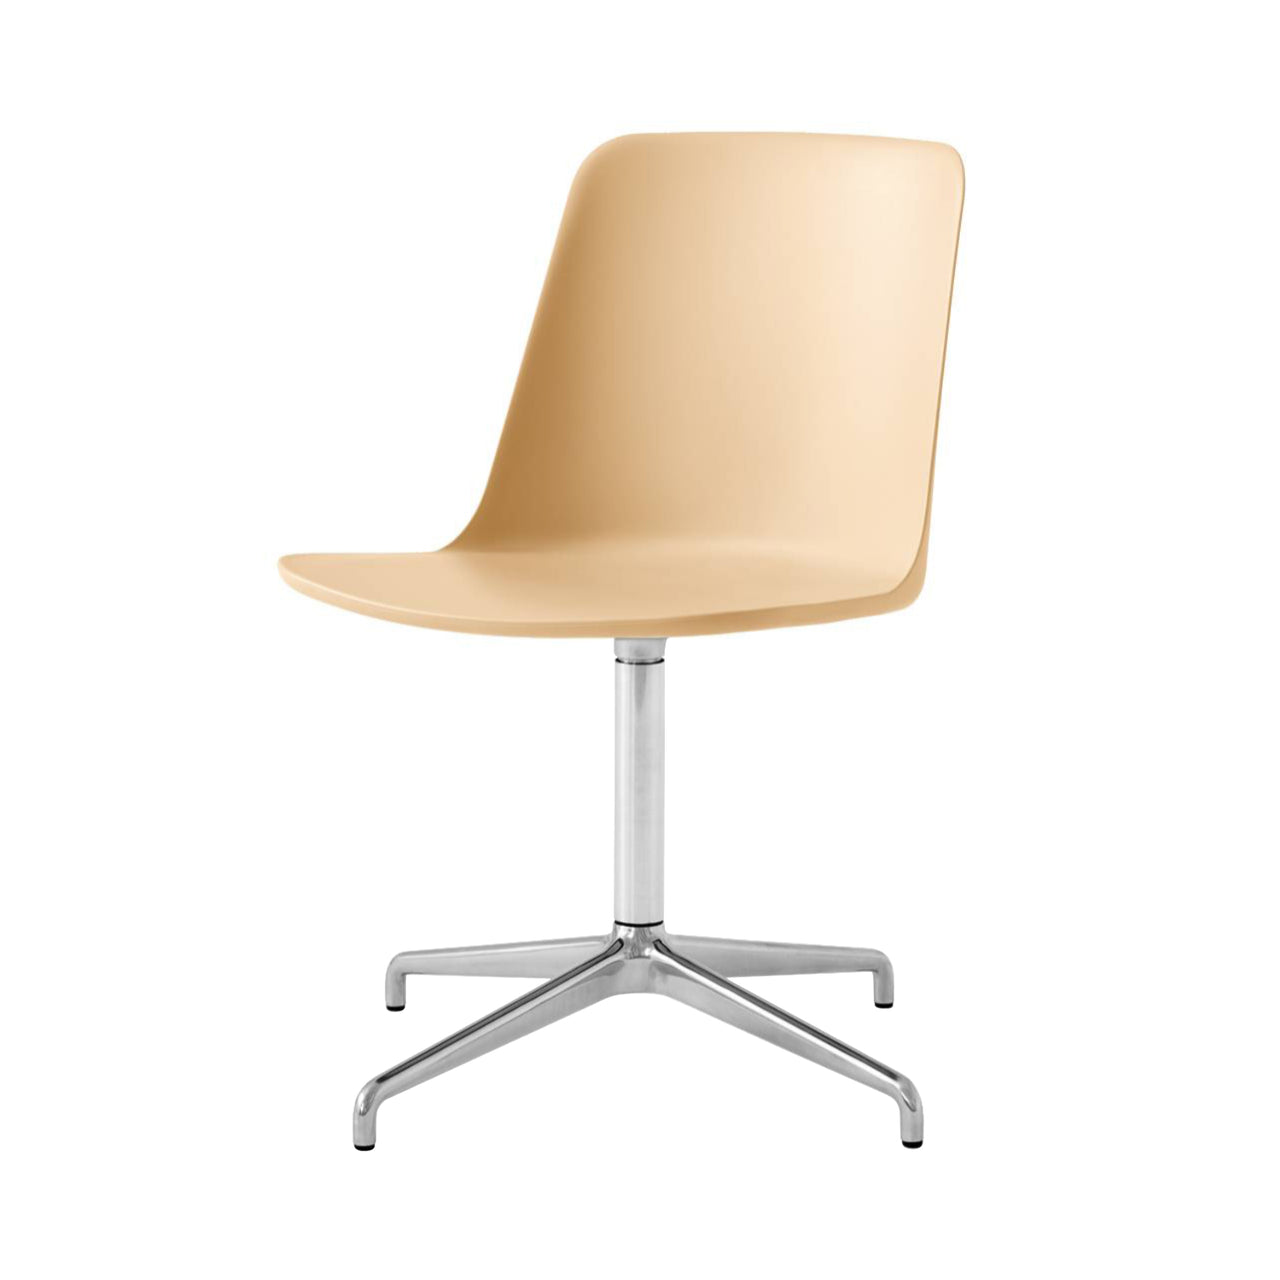 Rely Chair HW16: Beige Sand + Polished Aluminum